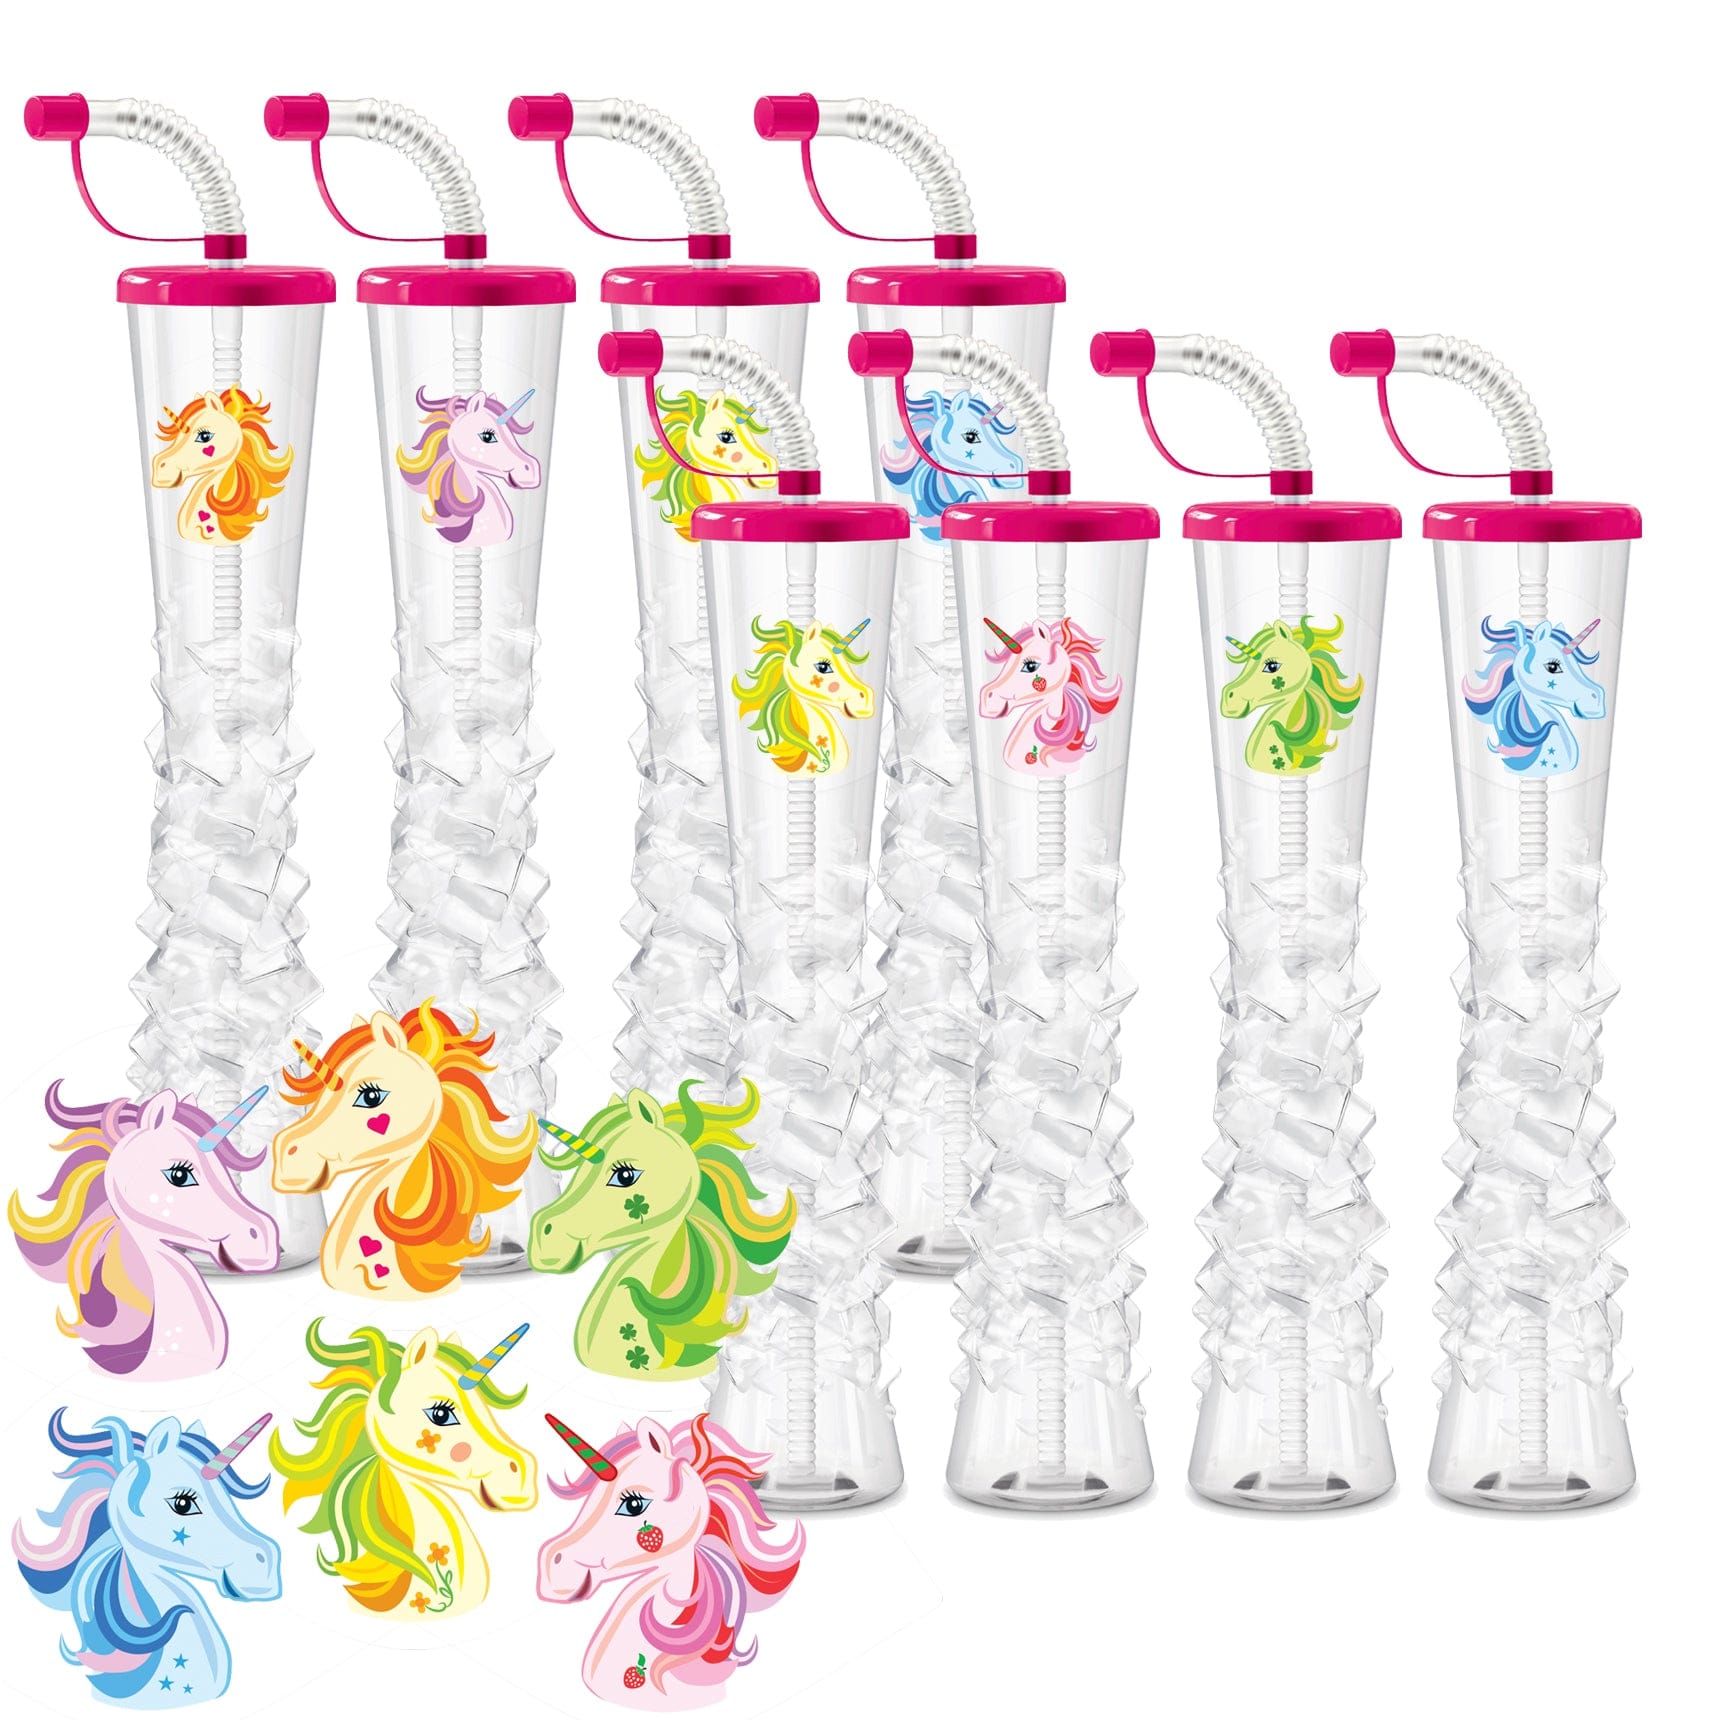 Sweet World USA Yard Cups Pink with Unicorn Unicorn Ice Yard Cups (54 Cups) - for Margaritas and Frozen Drinks, Kids Parties - 17oz. (500ml) cups with lids and straws